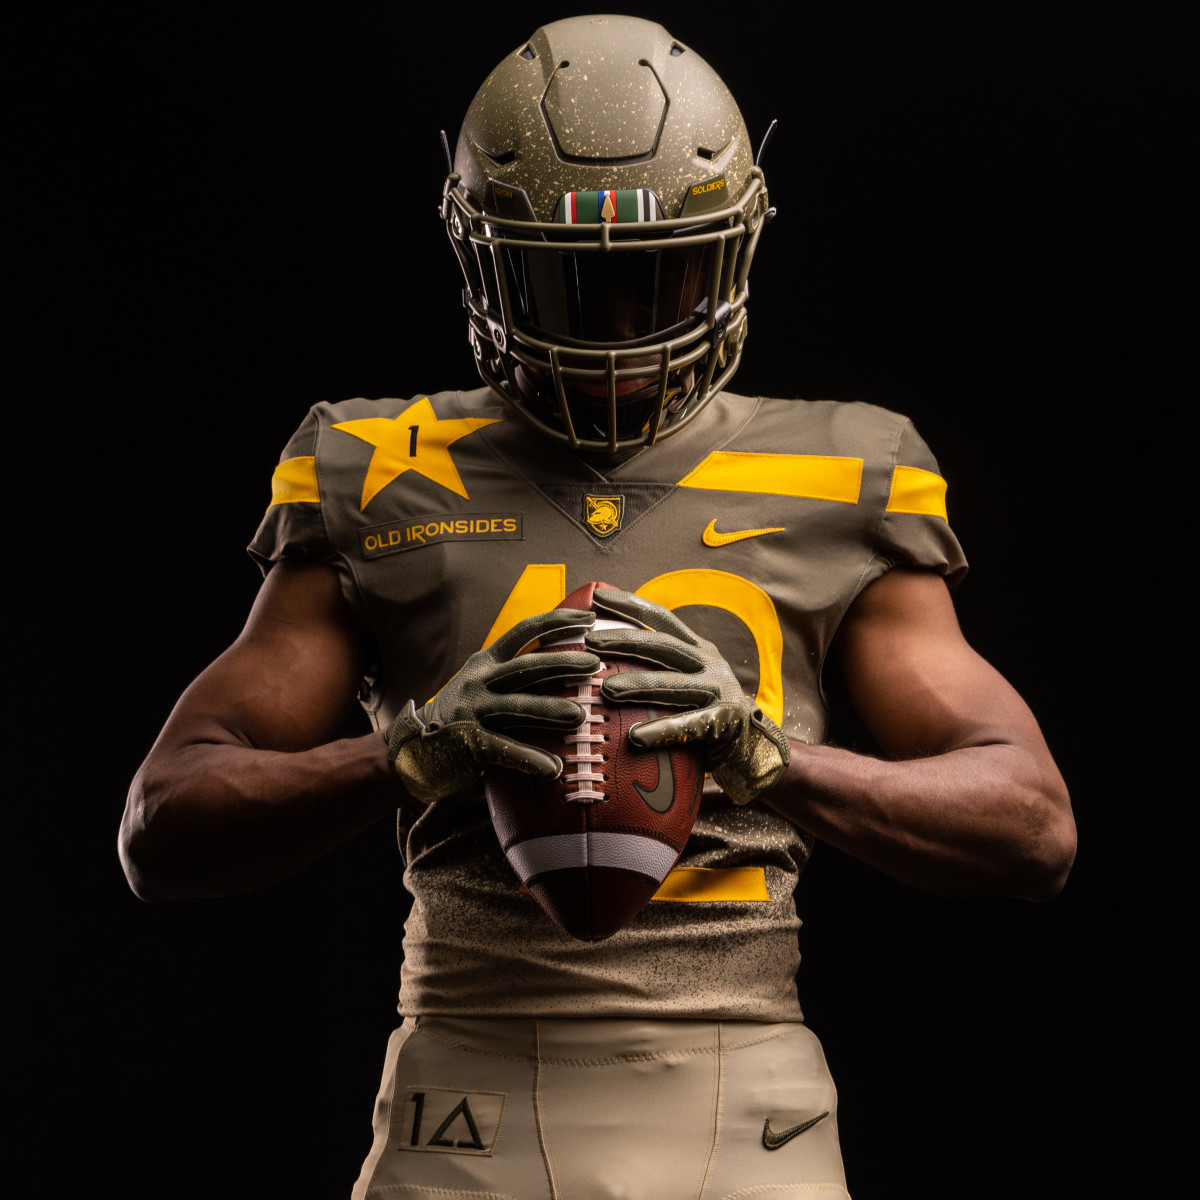 Uniforms for the Army v. Navy game have been unveiled Footballscoop